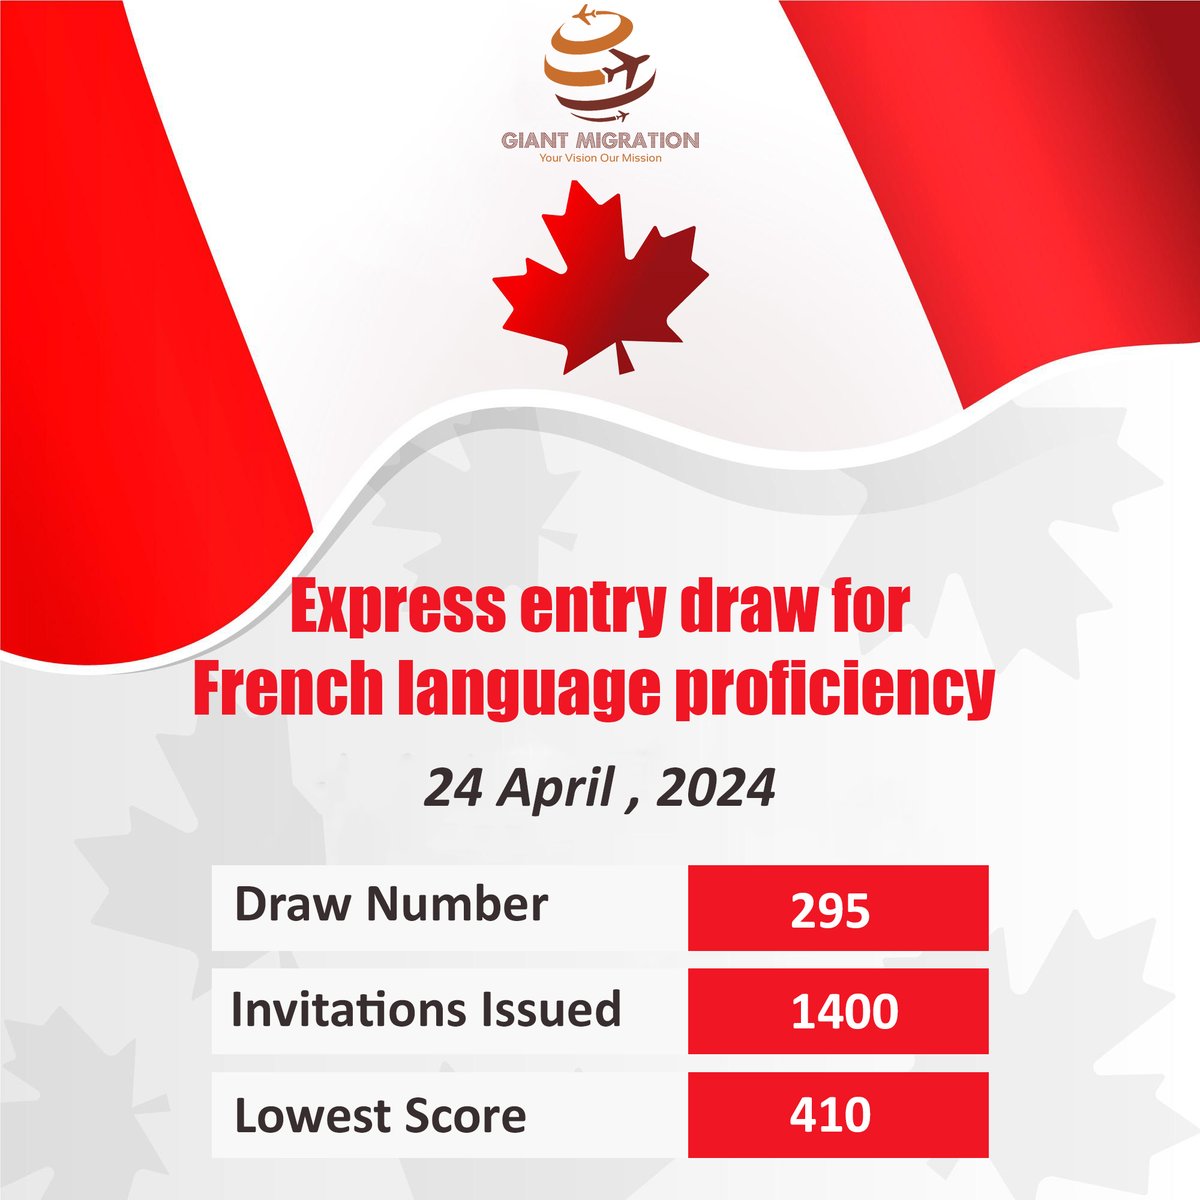 The #Canadian #ExpressEntrydraw 295 saw the lowest #CRSscore of 410. A total of 1,400 candidates were invited under #Frenchlanguage proficiency.

Connect with our team at-
📞 +971-50 386 8476 (UAE)
📞 +974-7030 8333 (Qatar)
📞 +91-886 886 00 22 (Delhi)

#Frenchdraw #Canada